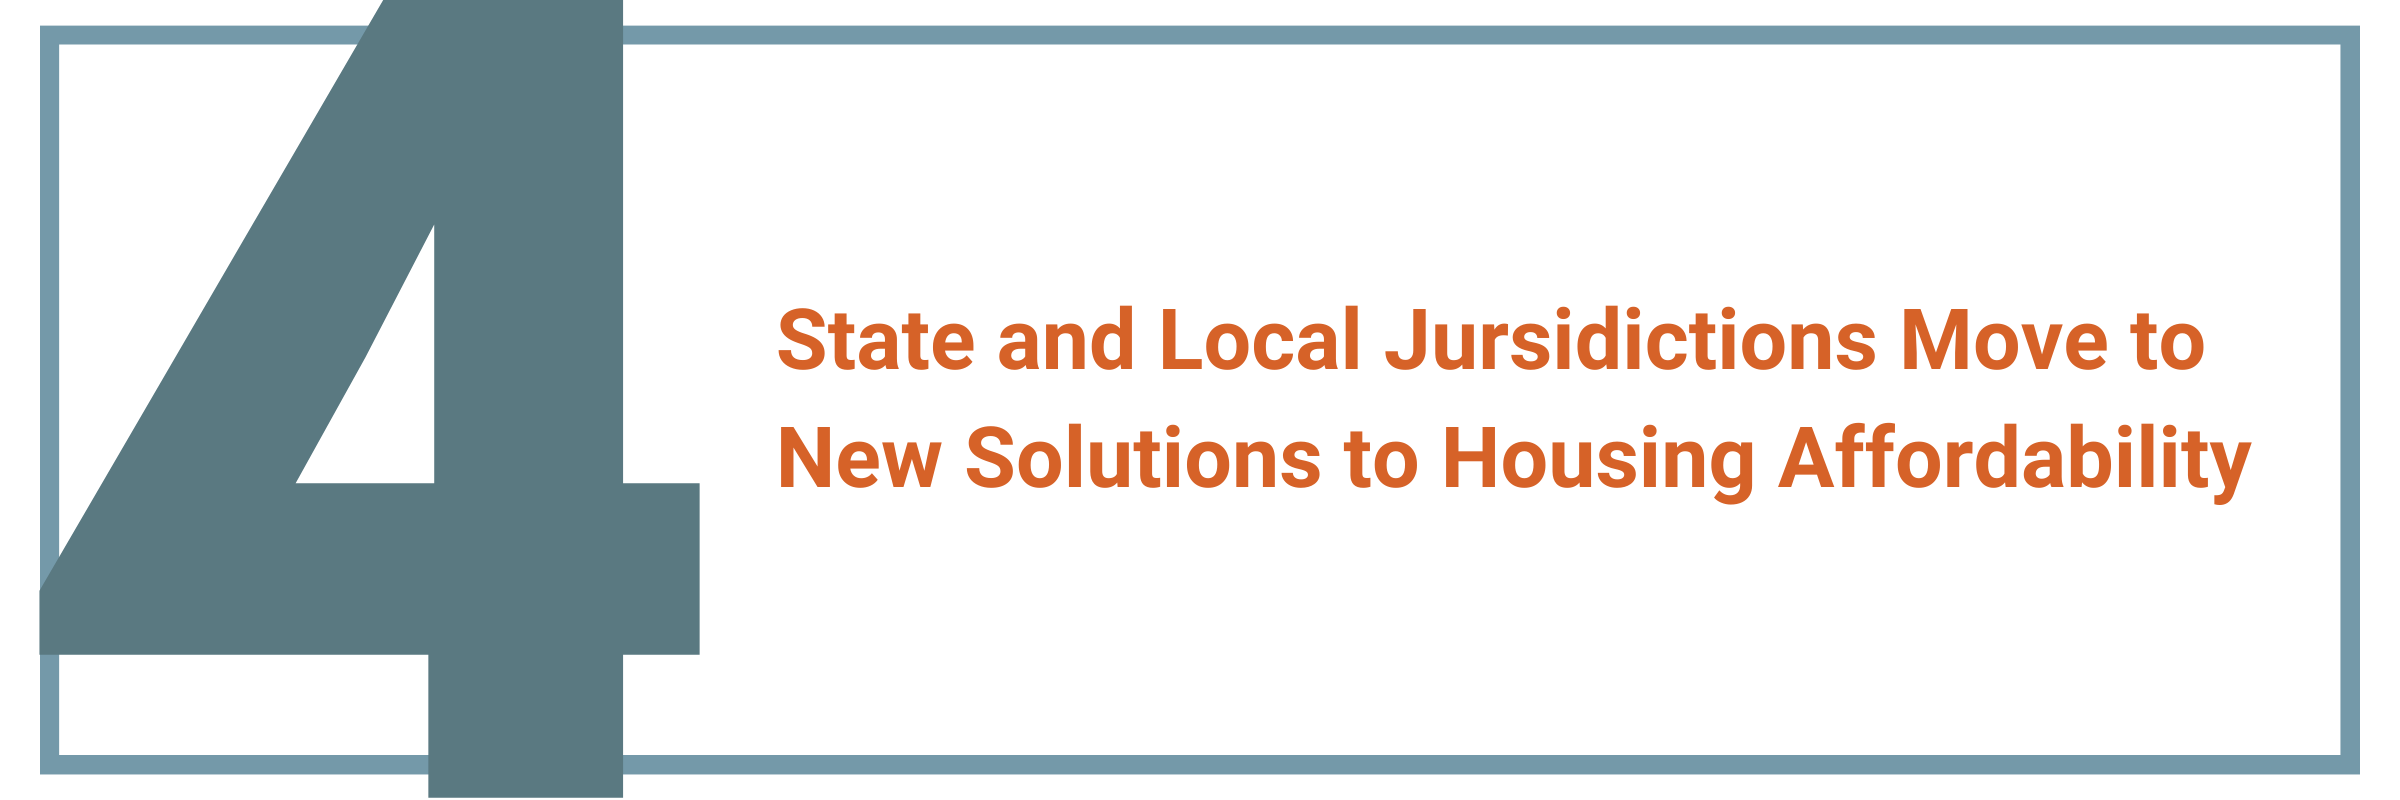 State and Local Jurisdictions Move to New Solutions to Housing Affordability